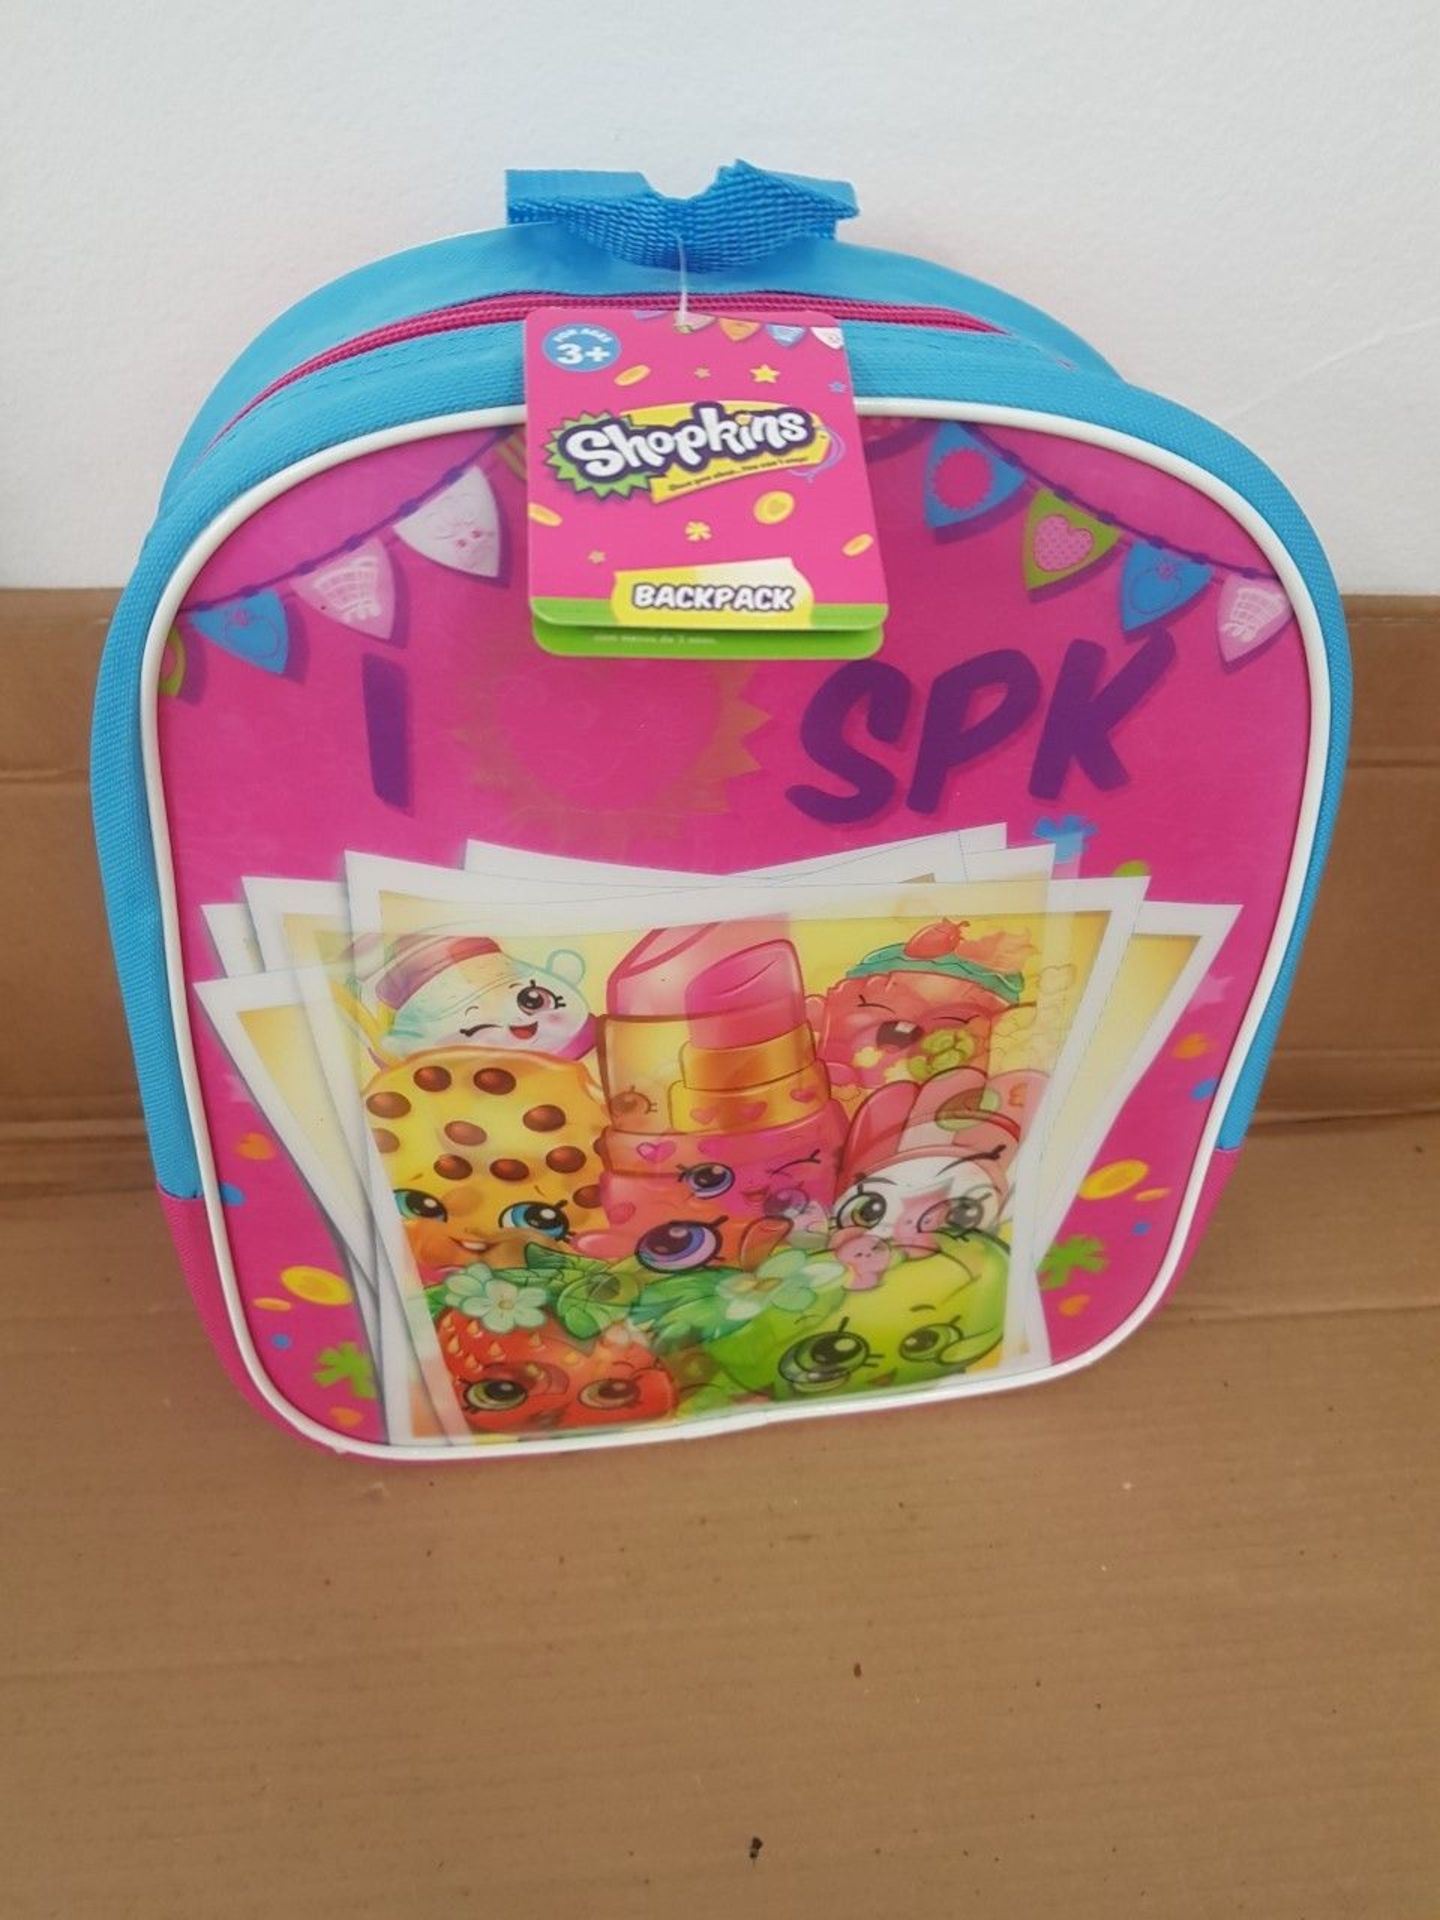 12 x BRAND NEW SHOPKINS LENTICULAR BACK PACKS. ORIGINAL RRP £12 EACH, GIVING THIS LOT A TOTAL - Image 3 of 4